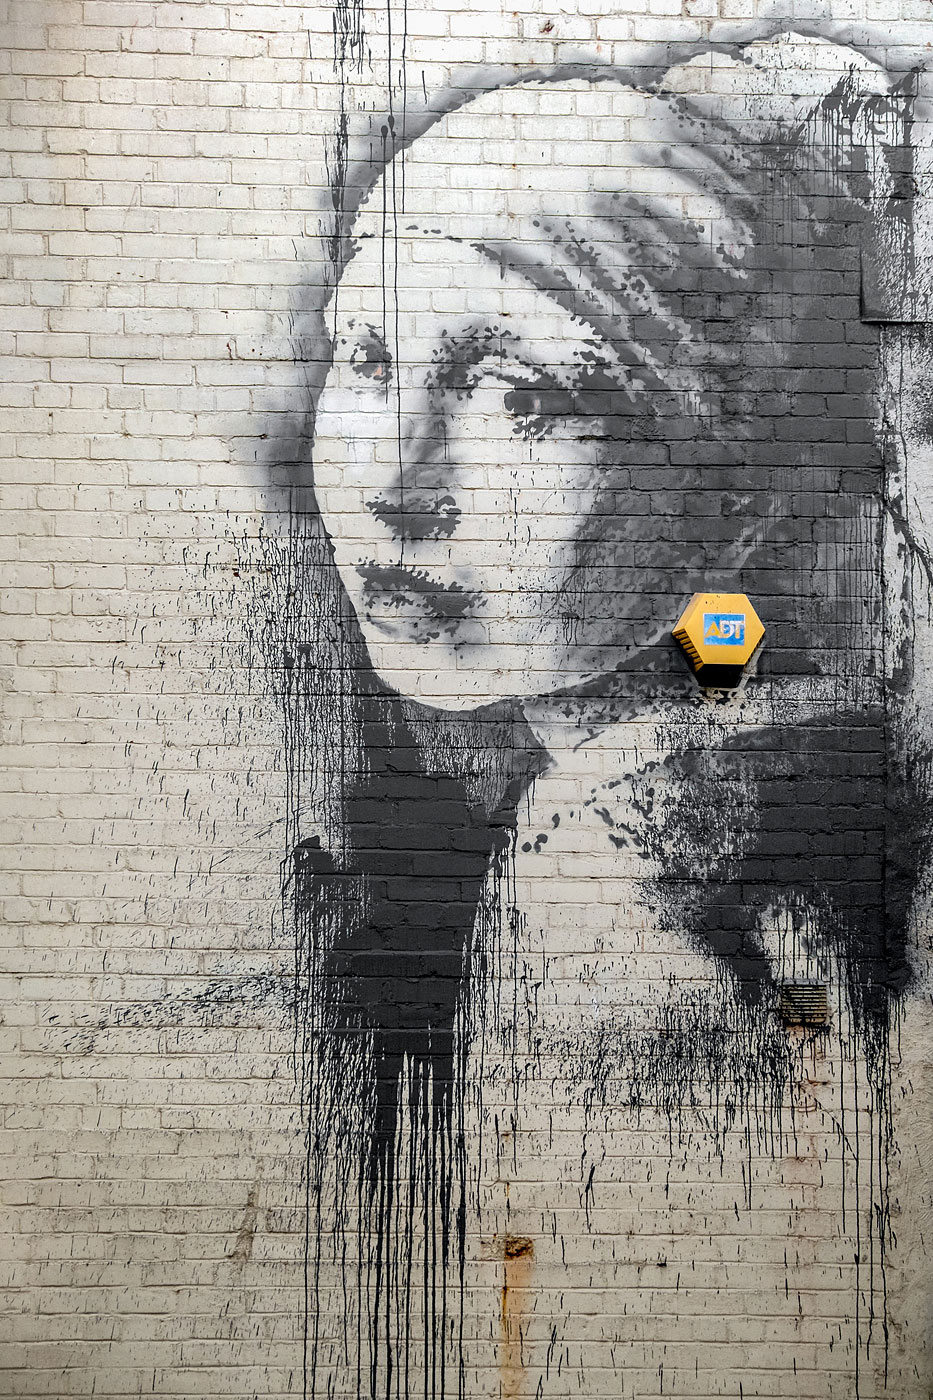 The new Banksy depicting the painting 'Girl with a Pearl Earring' by Dutch painter Johannes Vermeer is see on a wall in Bristol Harbourside, England on Oct. 20, 2014.